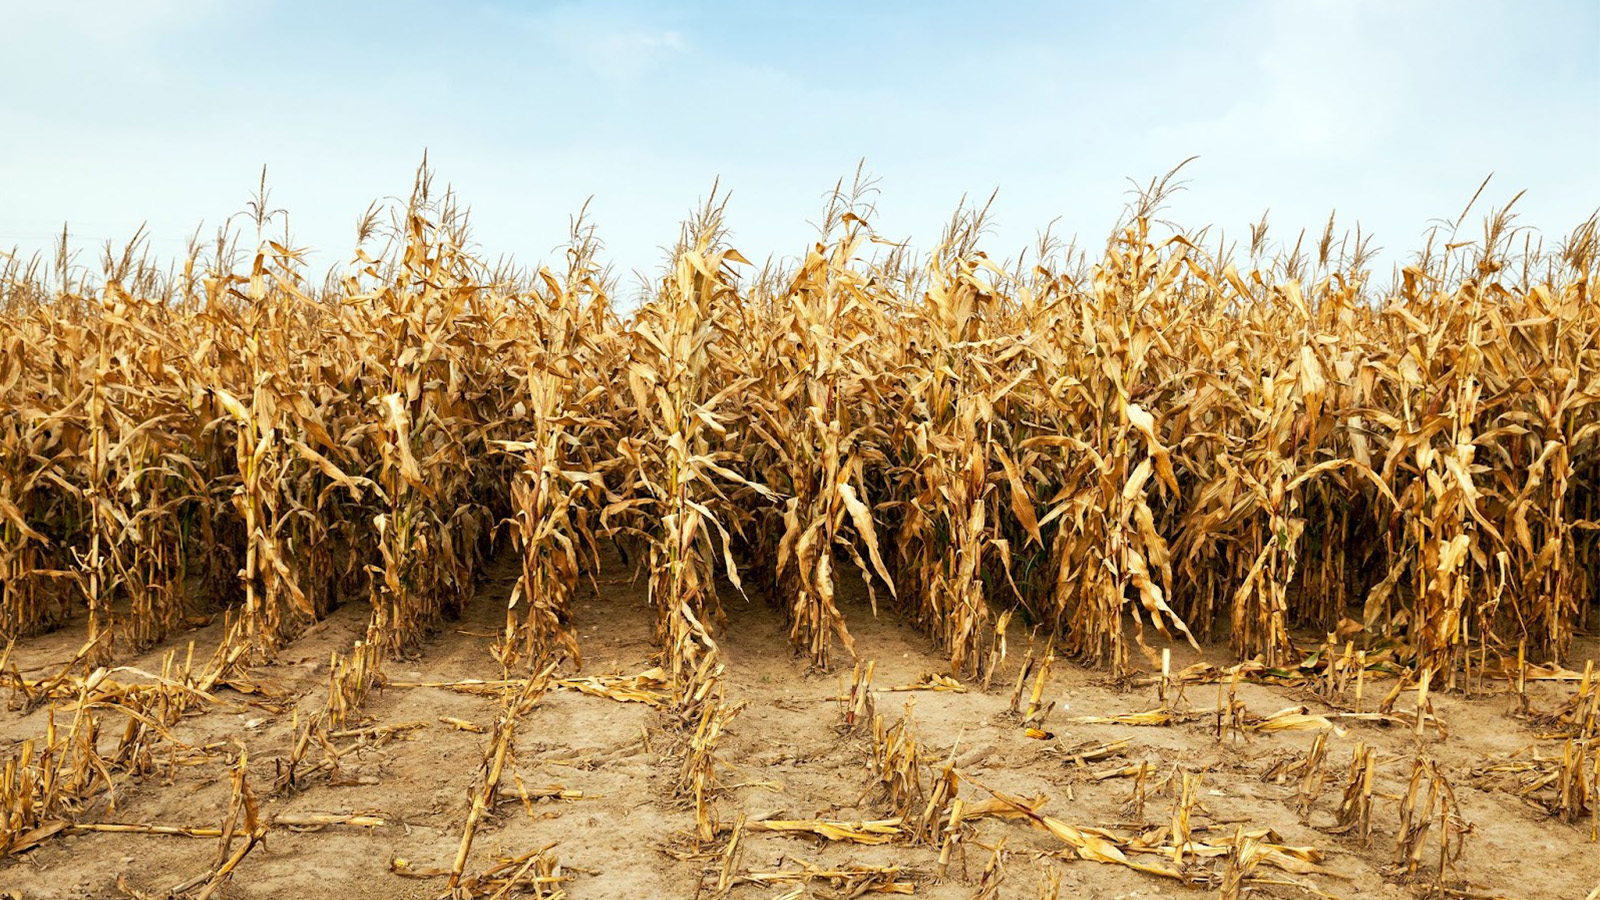 Crops in drought